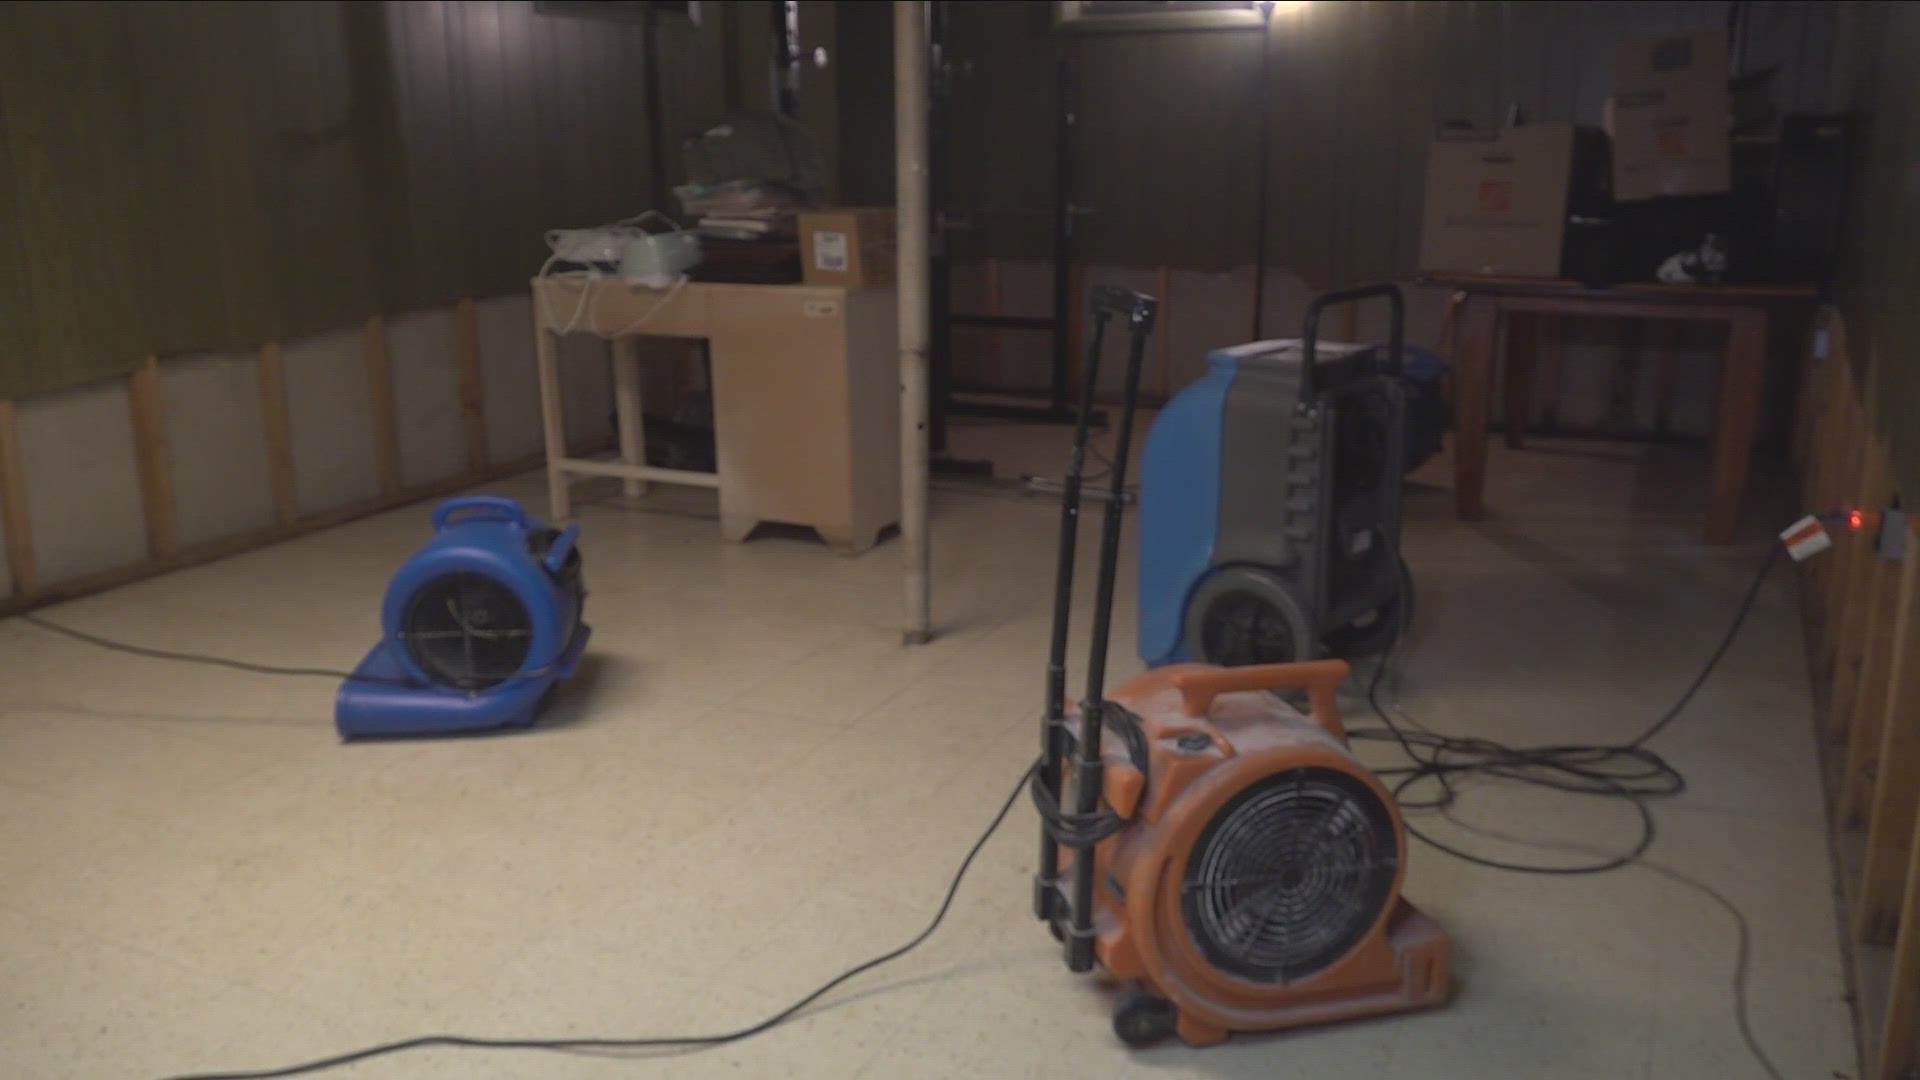 A number of Tonawanda resident's basements flooded after the weekend rain.